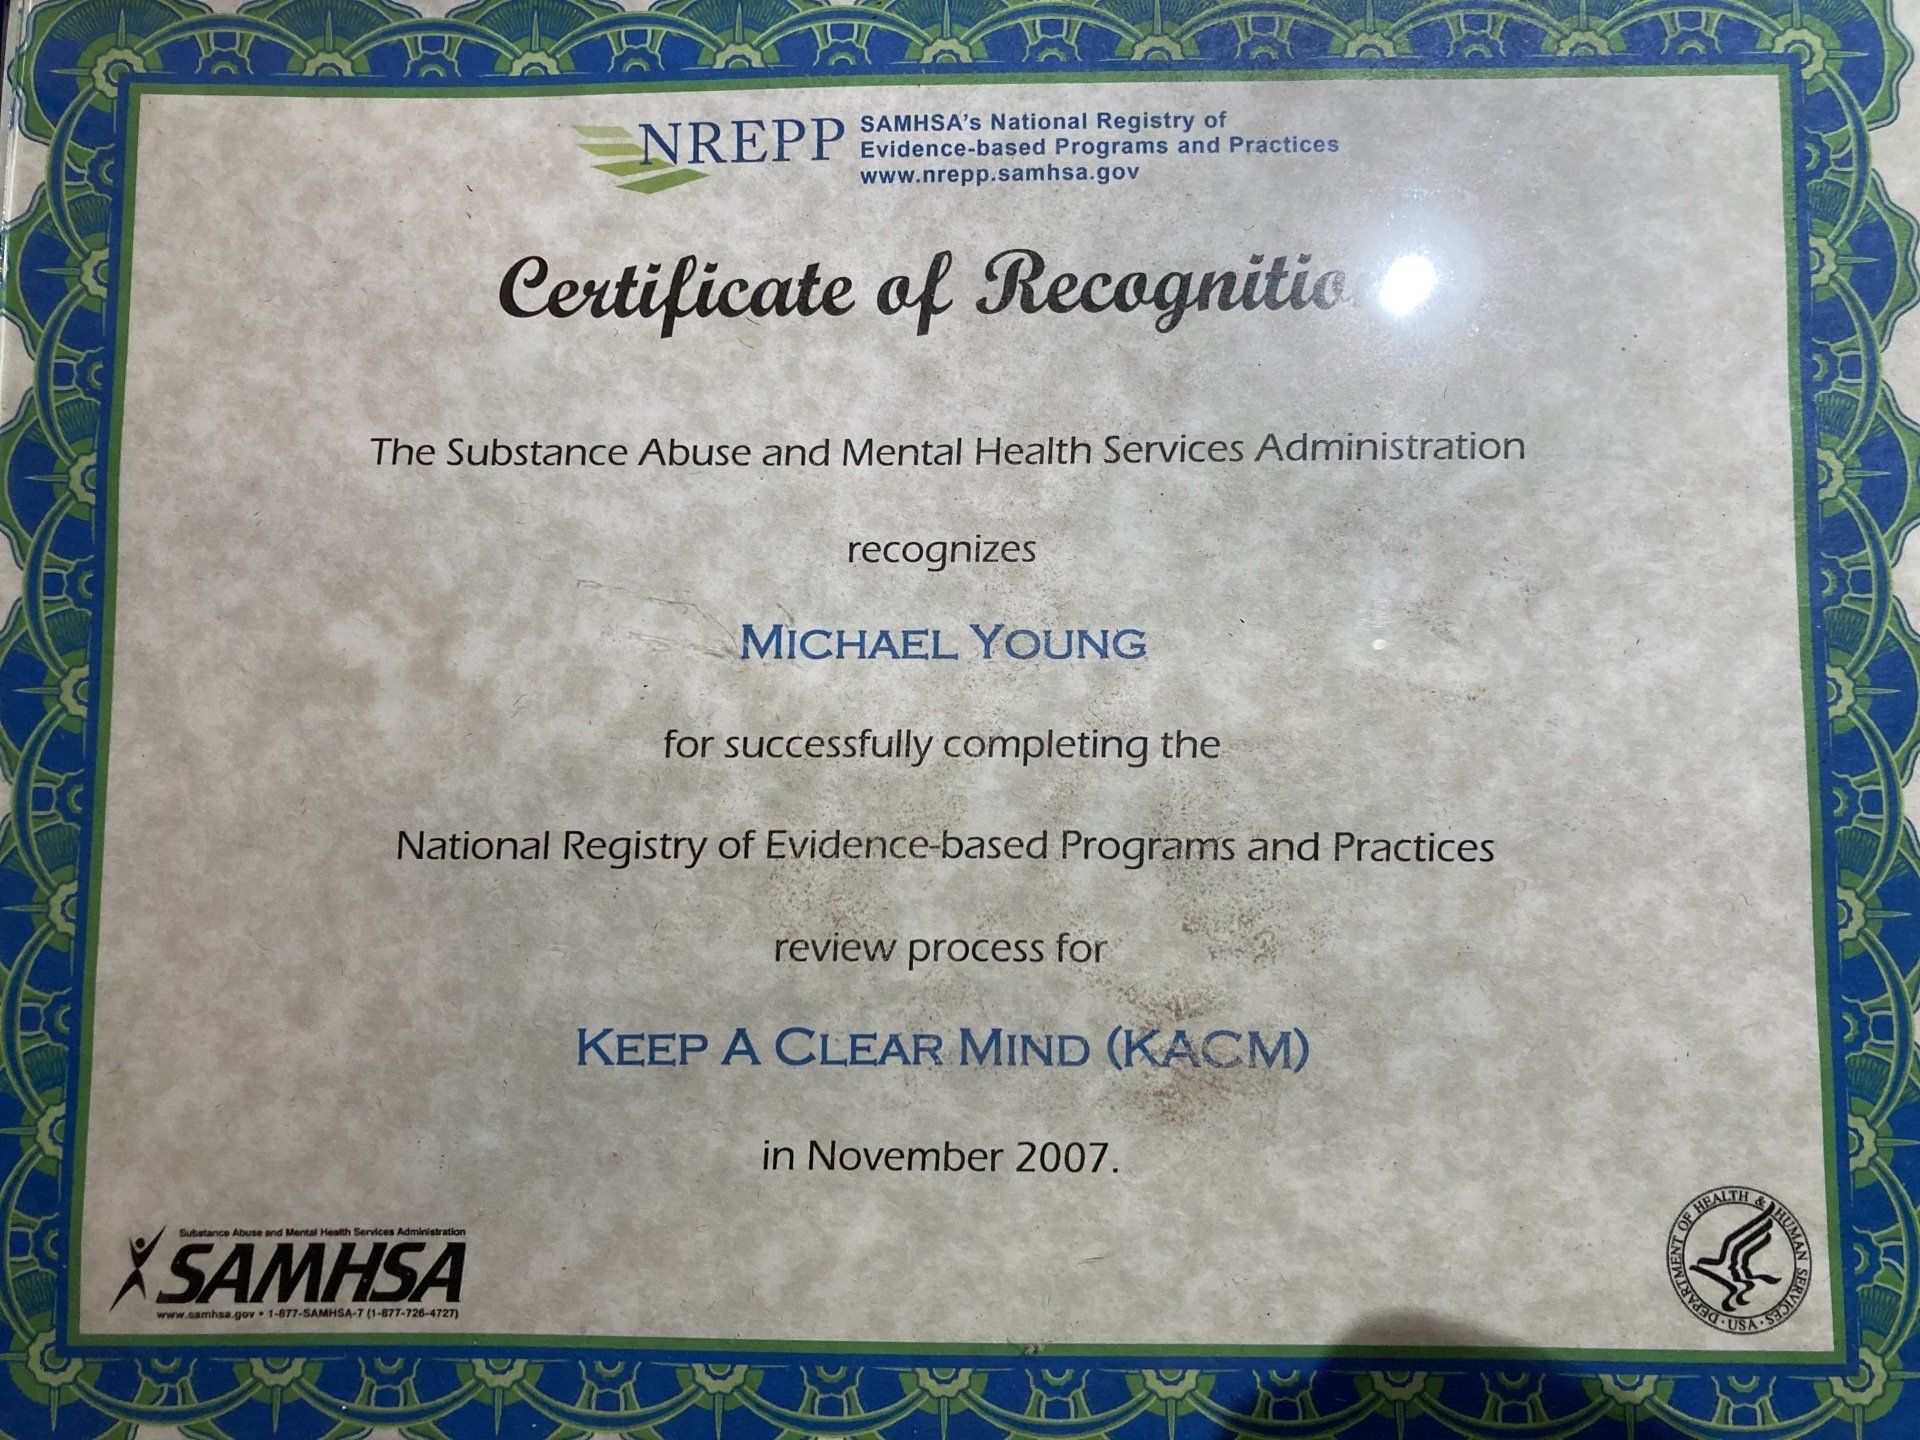 Certificate of Recognition to the NREPP and SAMHSA